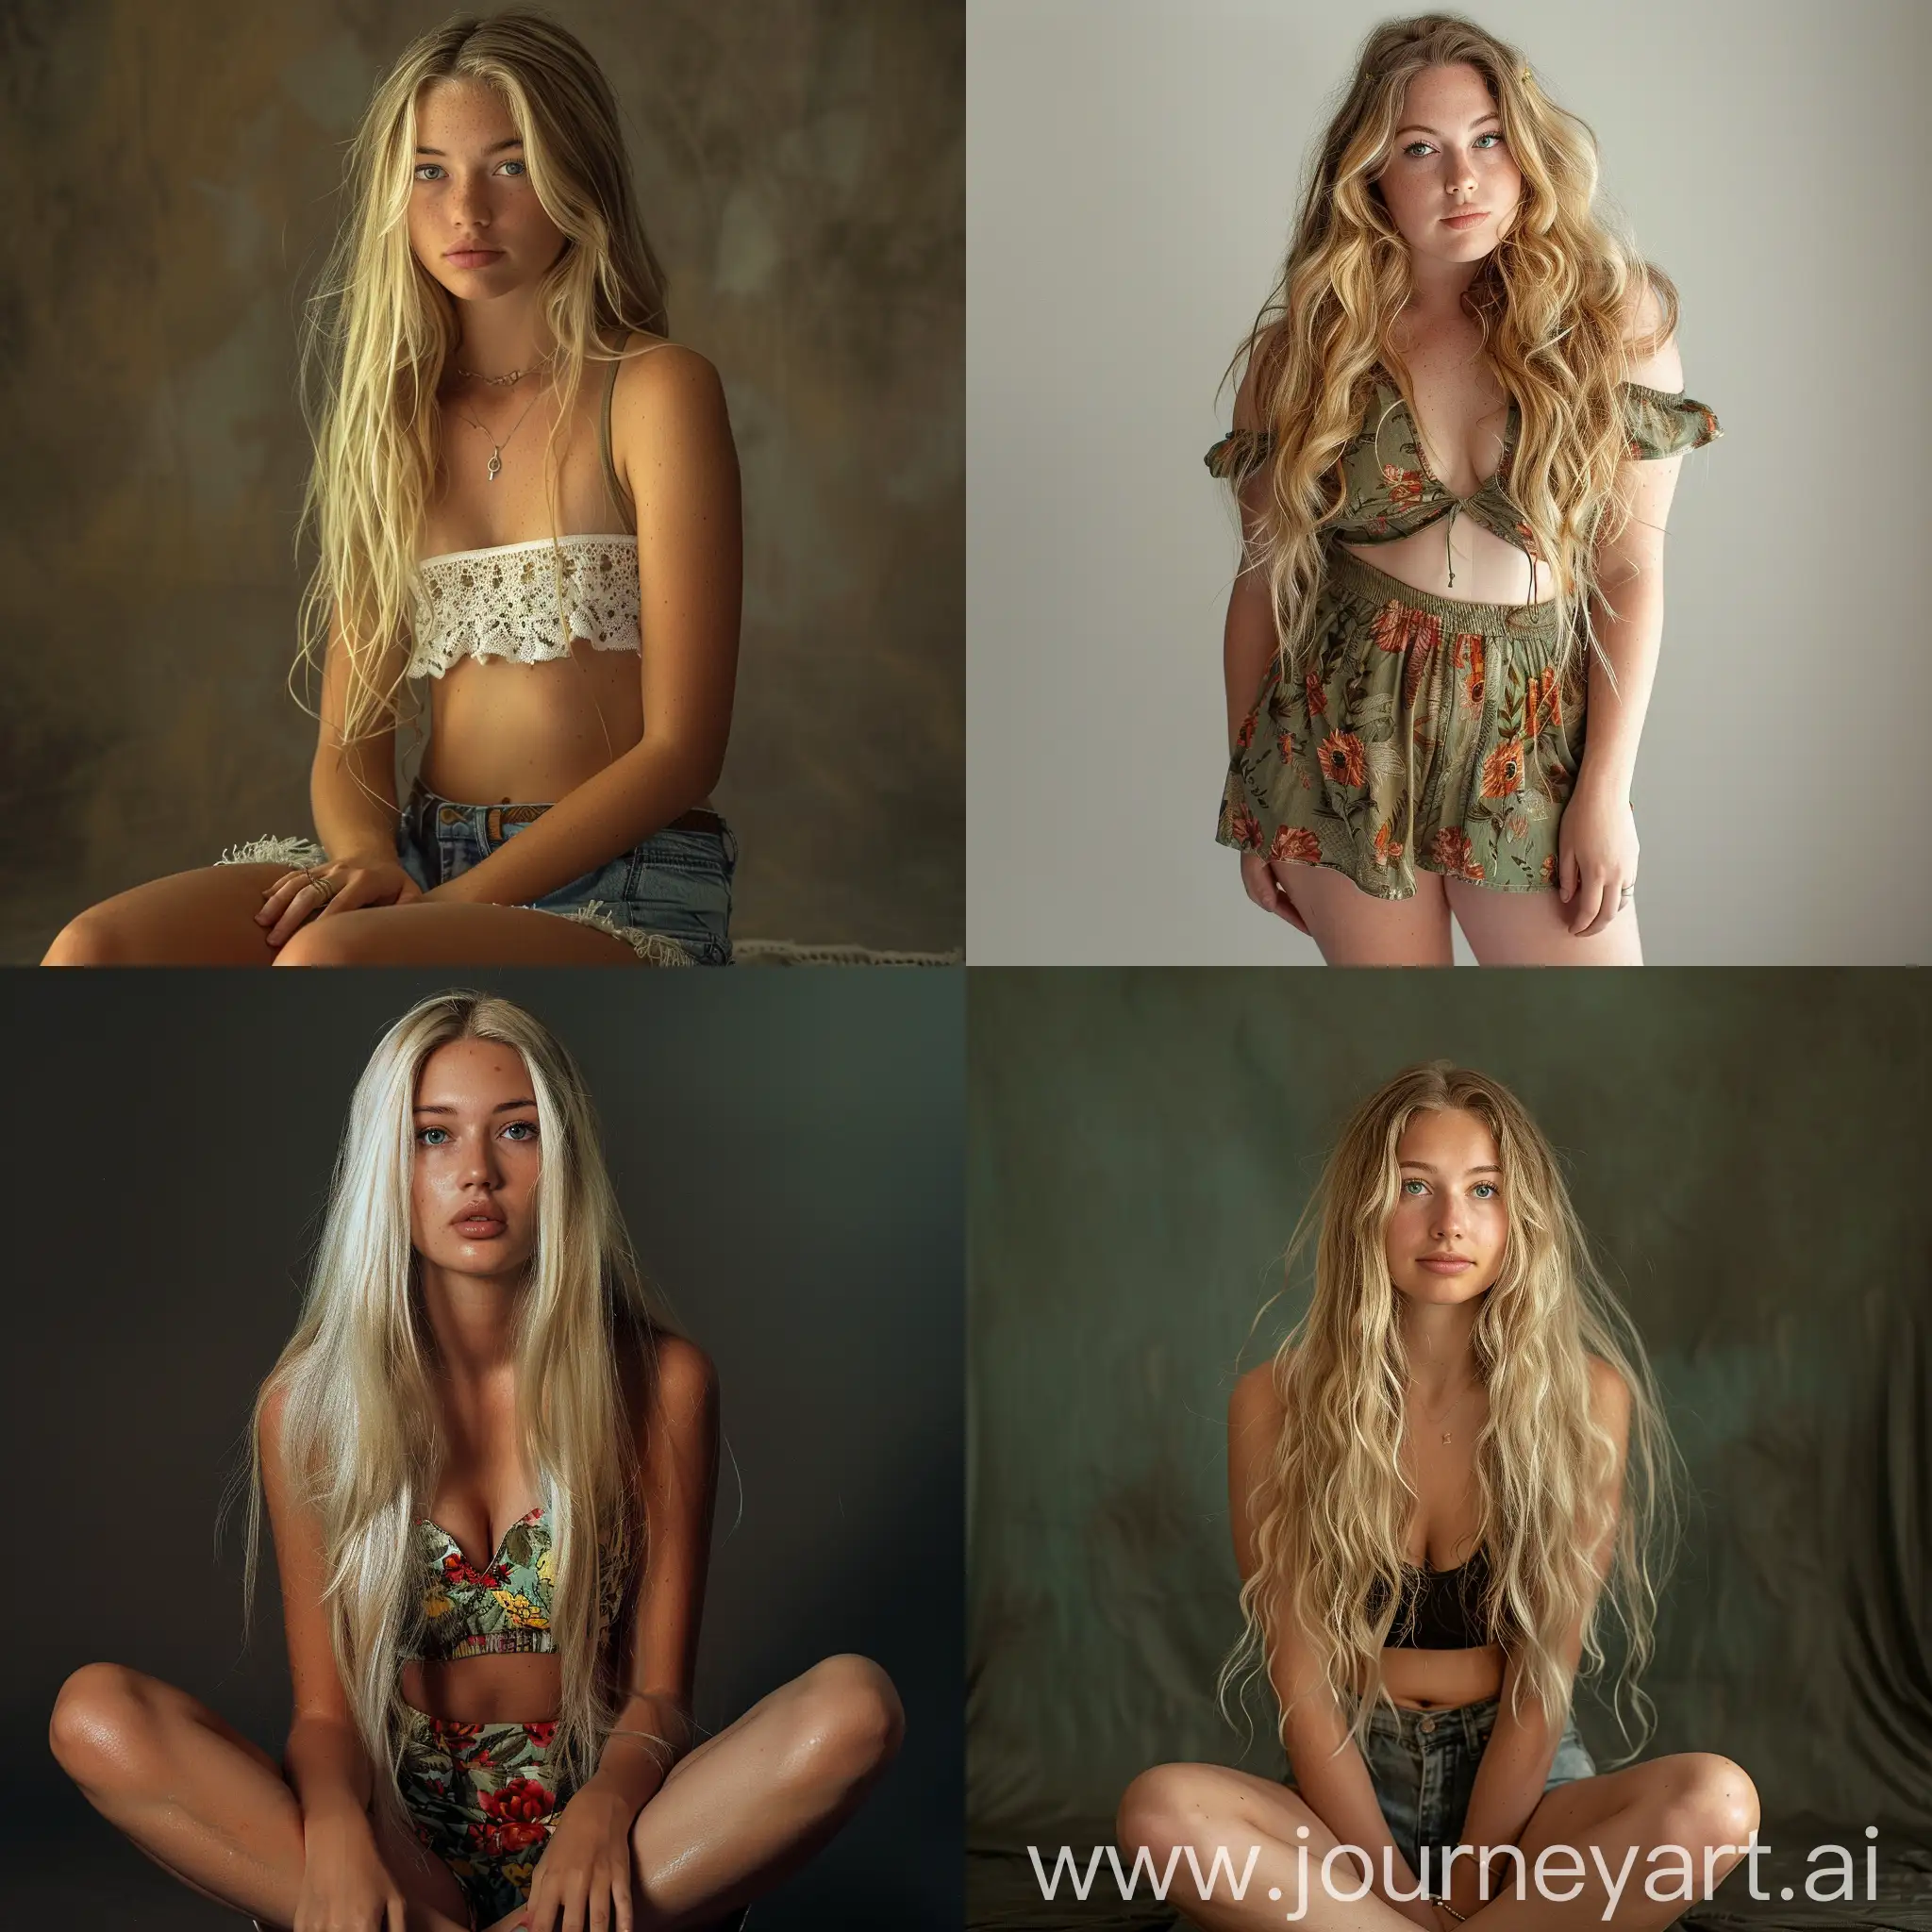 Studio-Portrait-of-Young-Woman-with-Long-Blonde-Hair-in-Beach-Attire